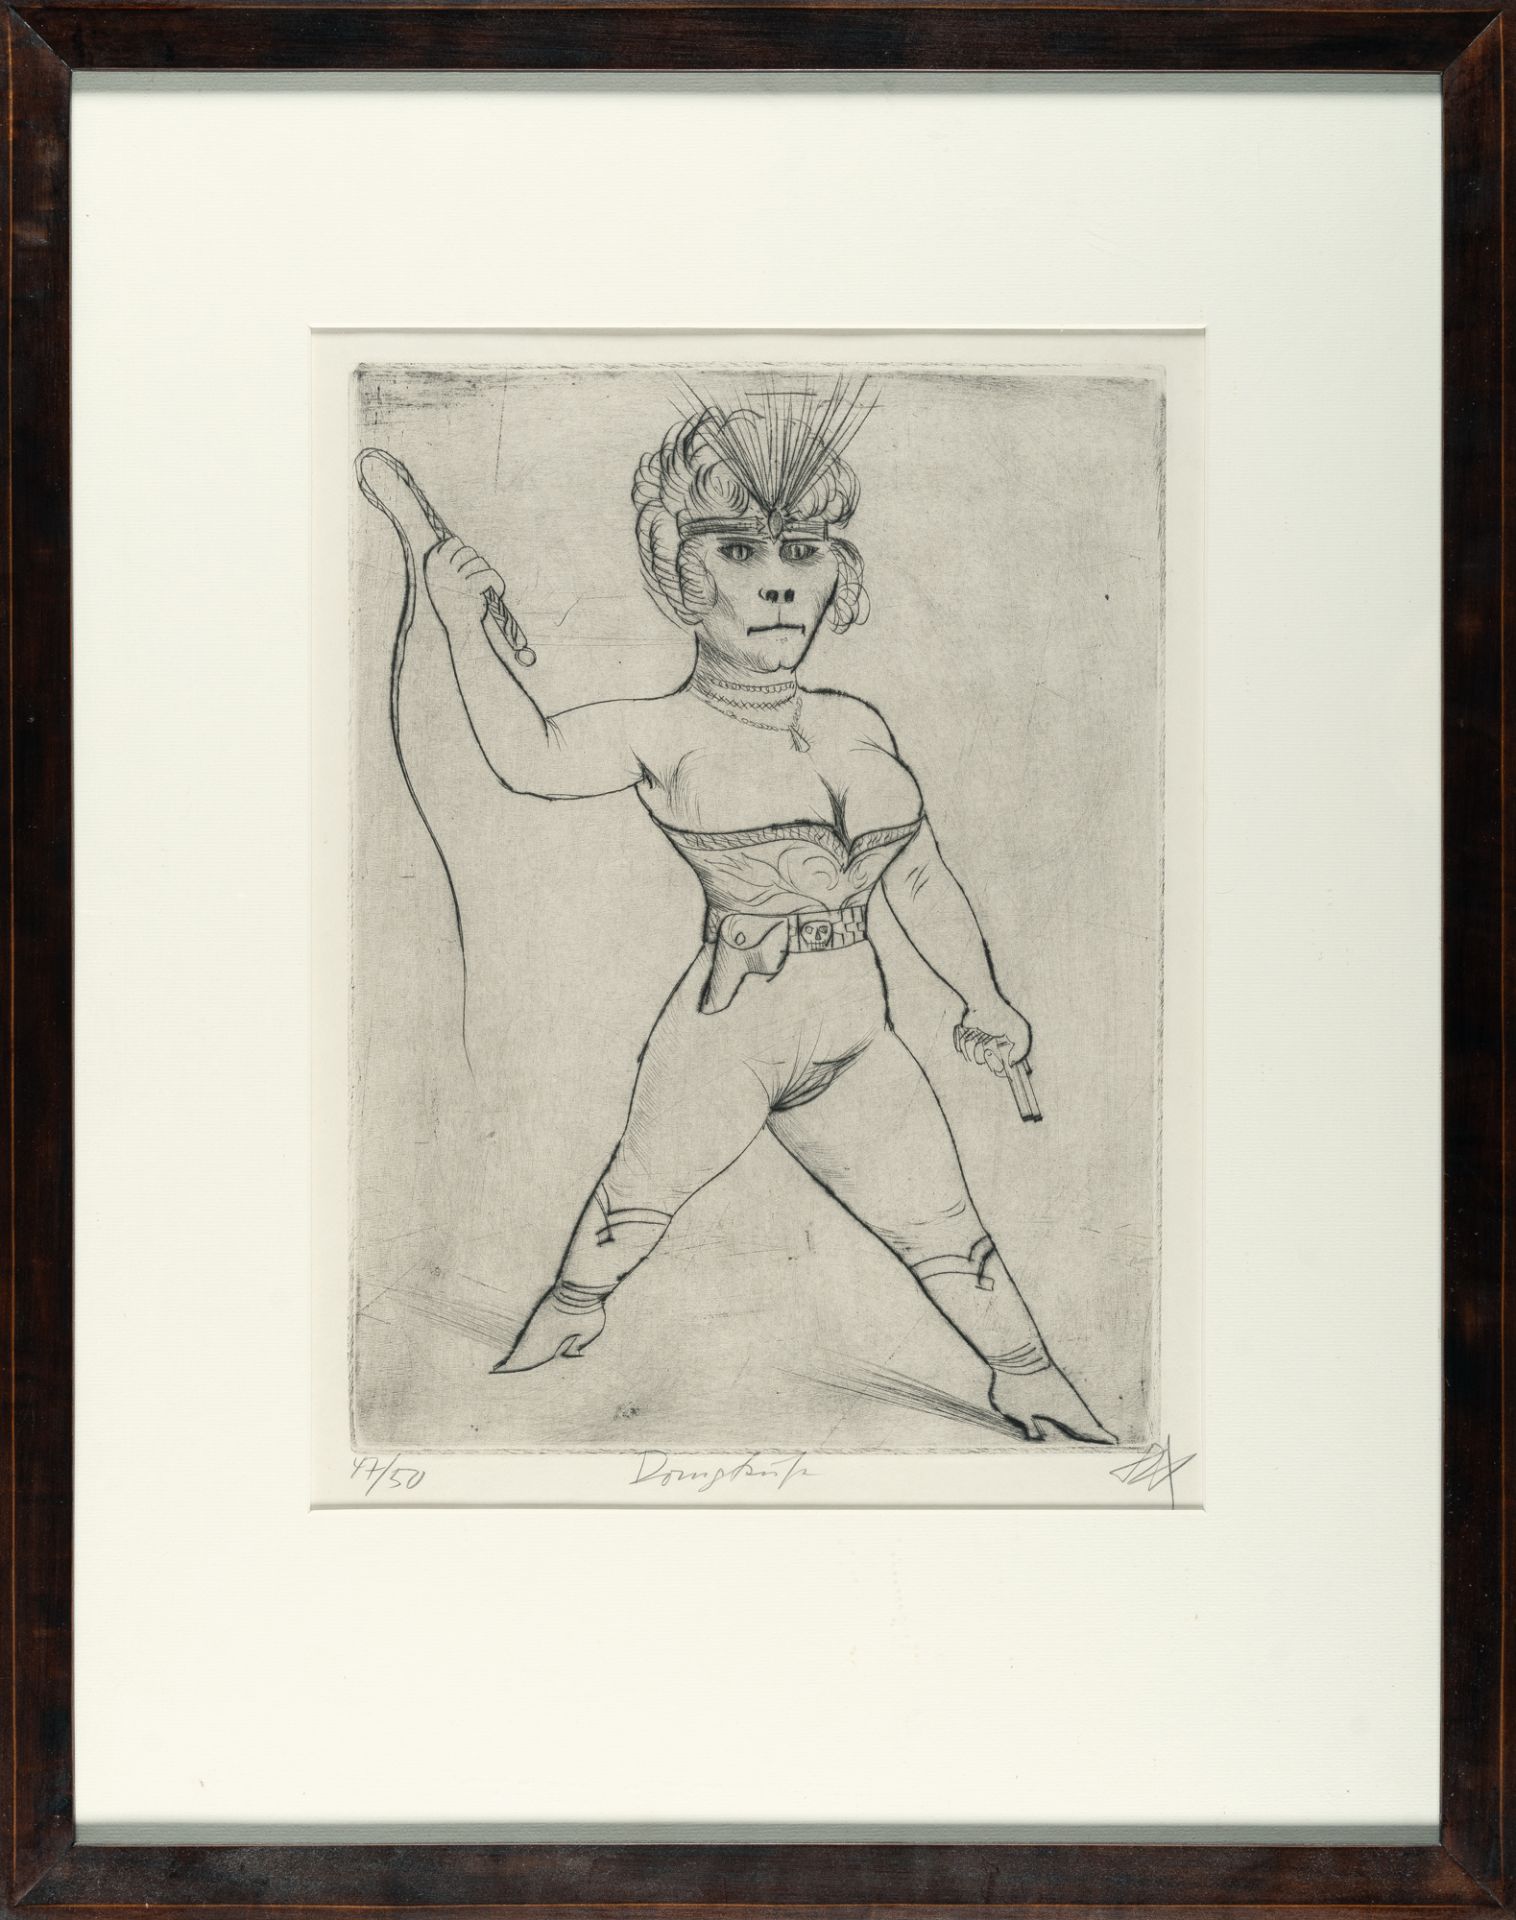 Otto Dix (1891 Untermhaus bei Gera - Singen 1969) – “Dompteuse” (Tamer).Etching with drypoint on - Image 4 of 4